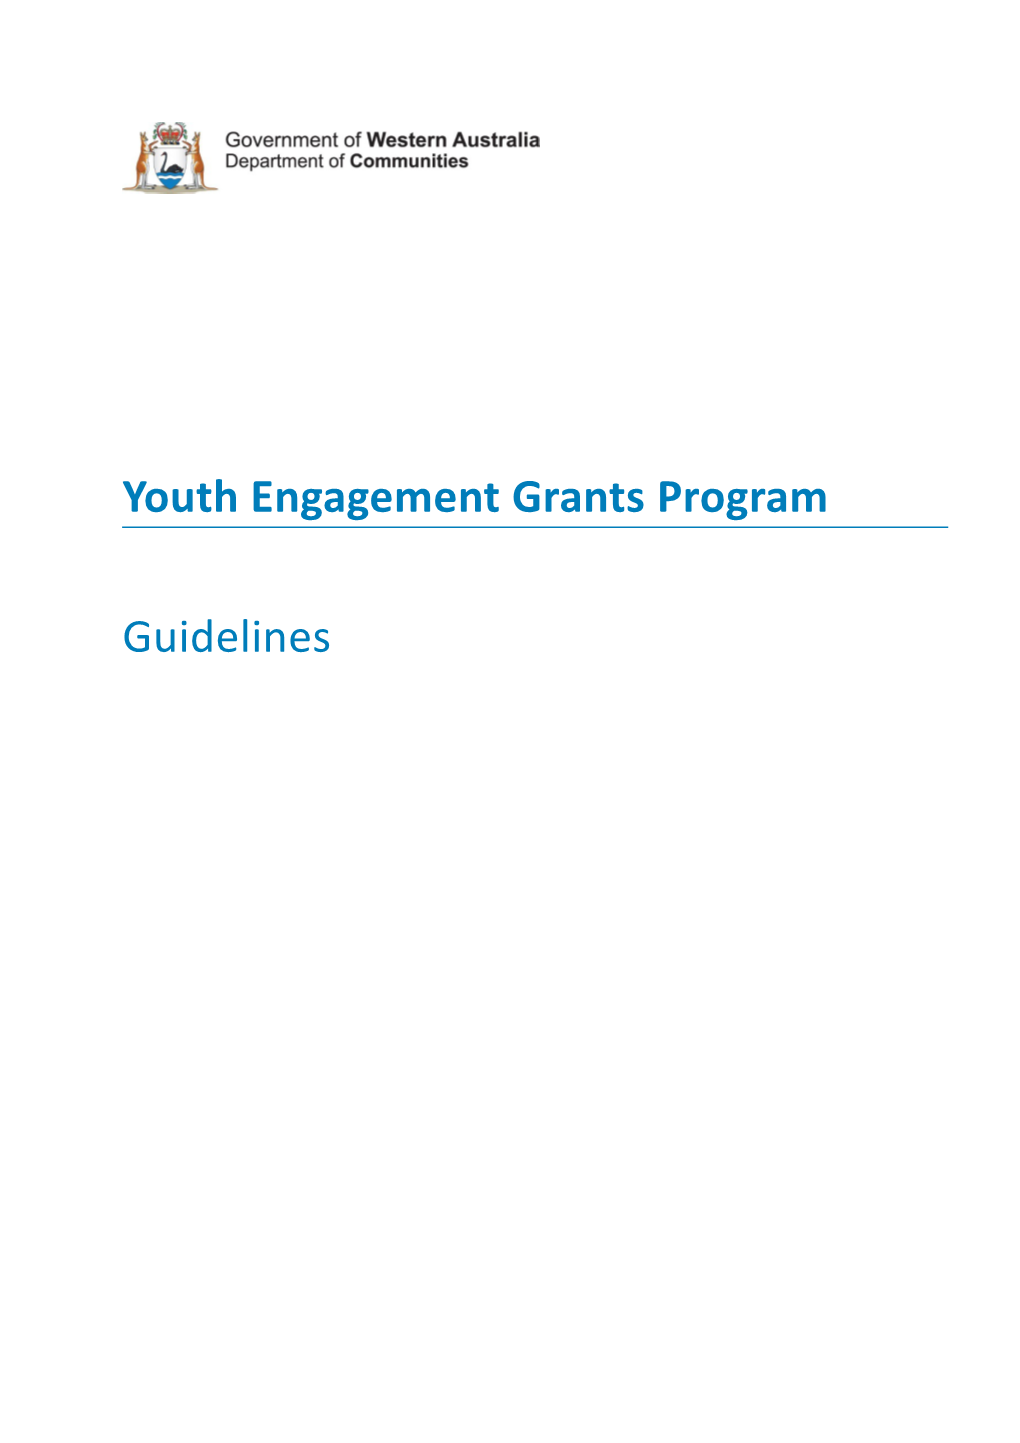 Youth Engagement Grants Program Guidelines